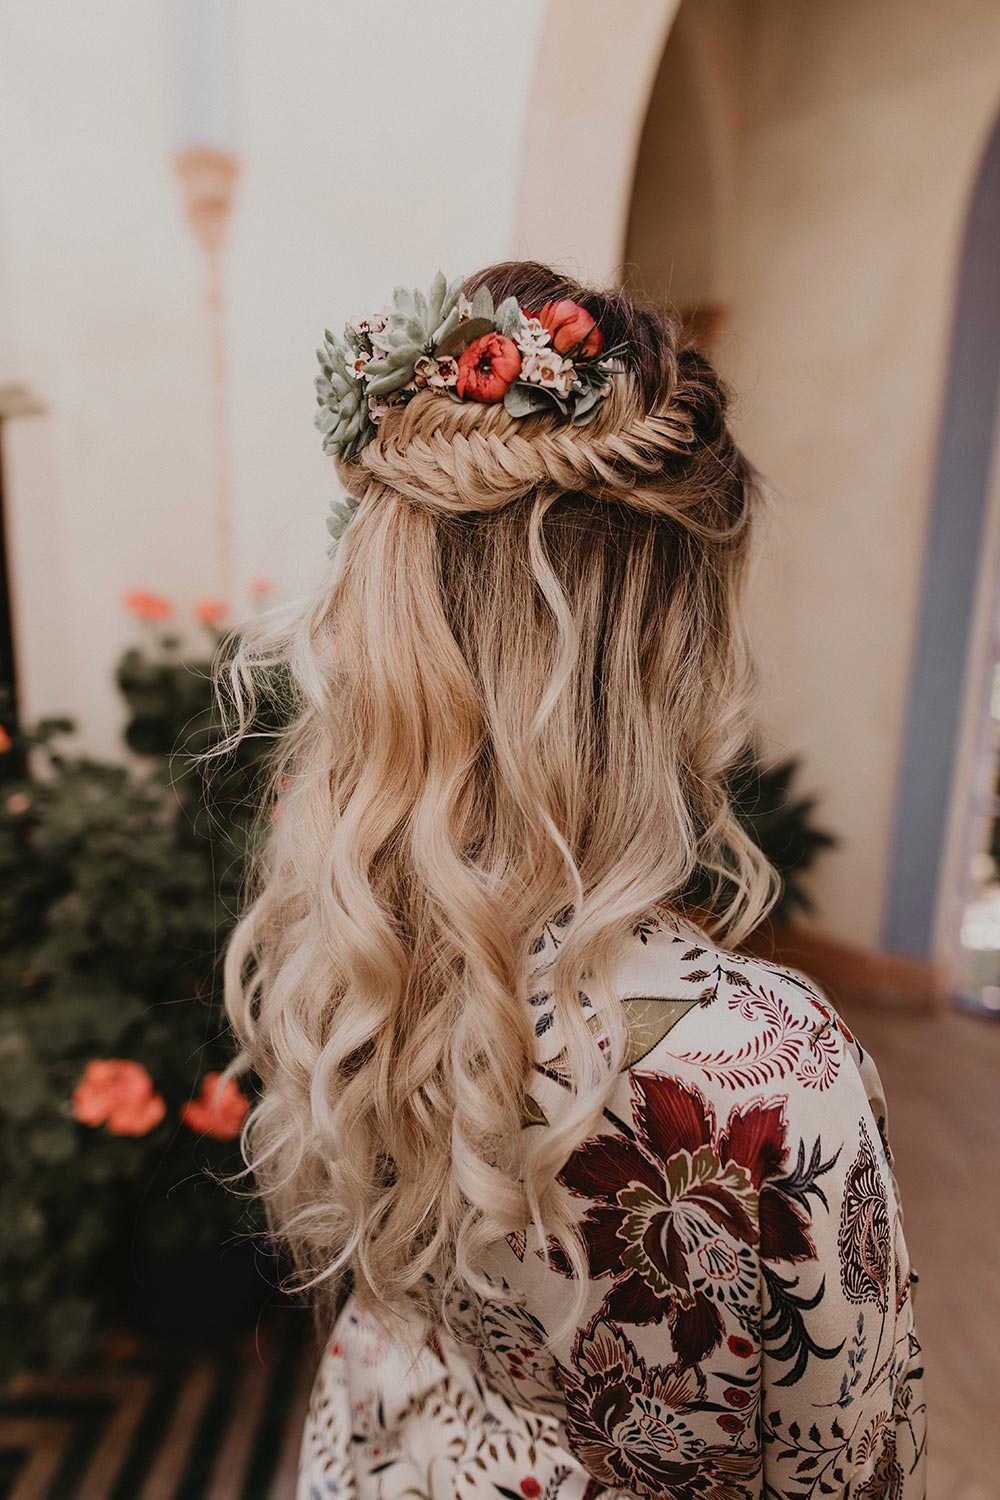 Bridal hairstyle with flowers